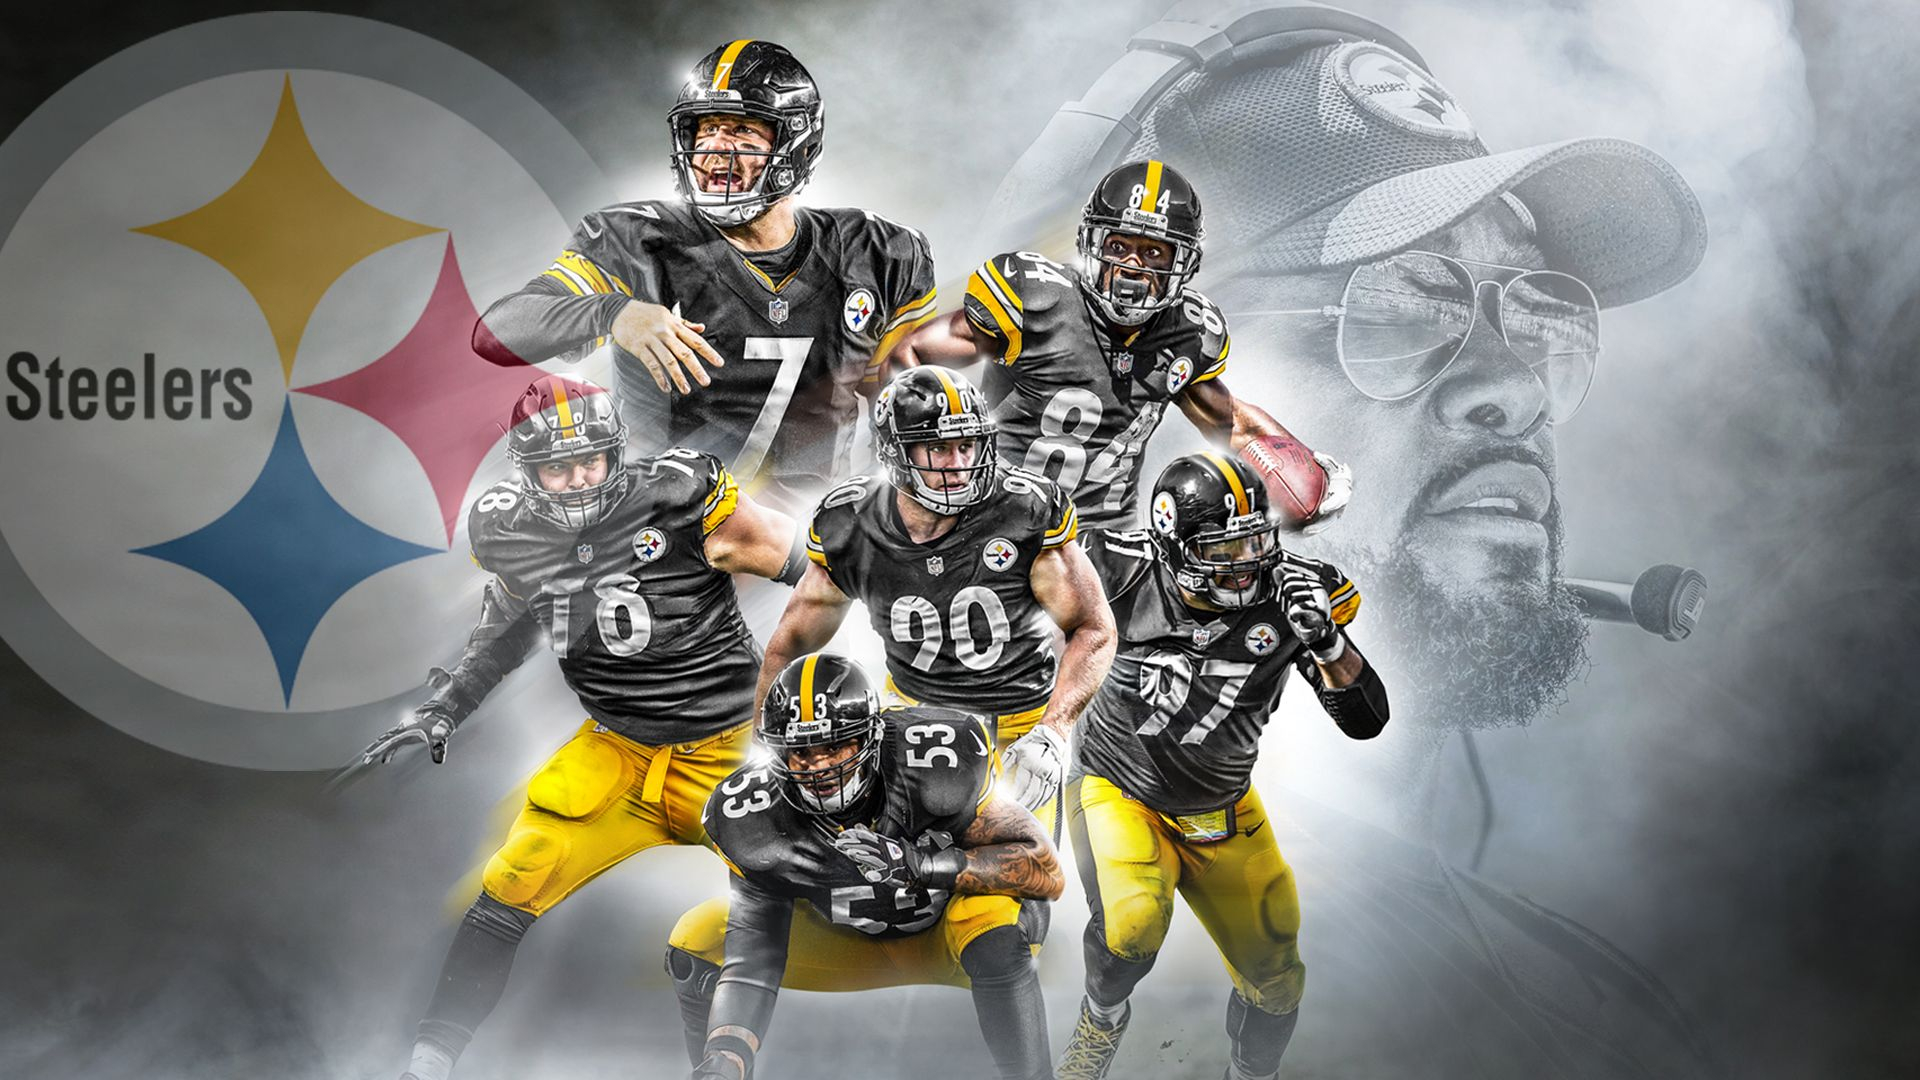 1920x1080 Pittsburgh Steelers Wallpaper with Picture of Players and Coach HD Wallpapers | Wallpapers Download | High Resolution Wallpapers | Pittsburgh steelers wallpaper, Chicago bears wallpaper, Pittsburgh steelers